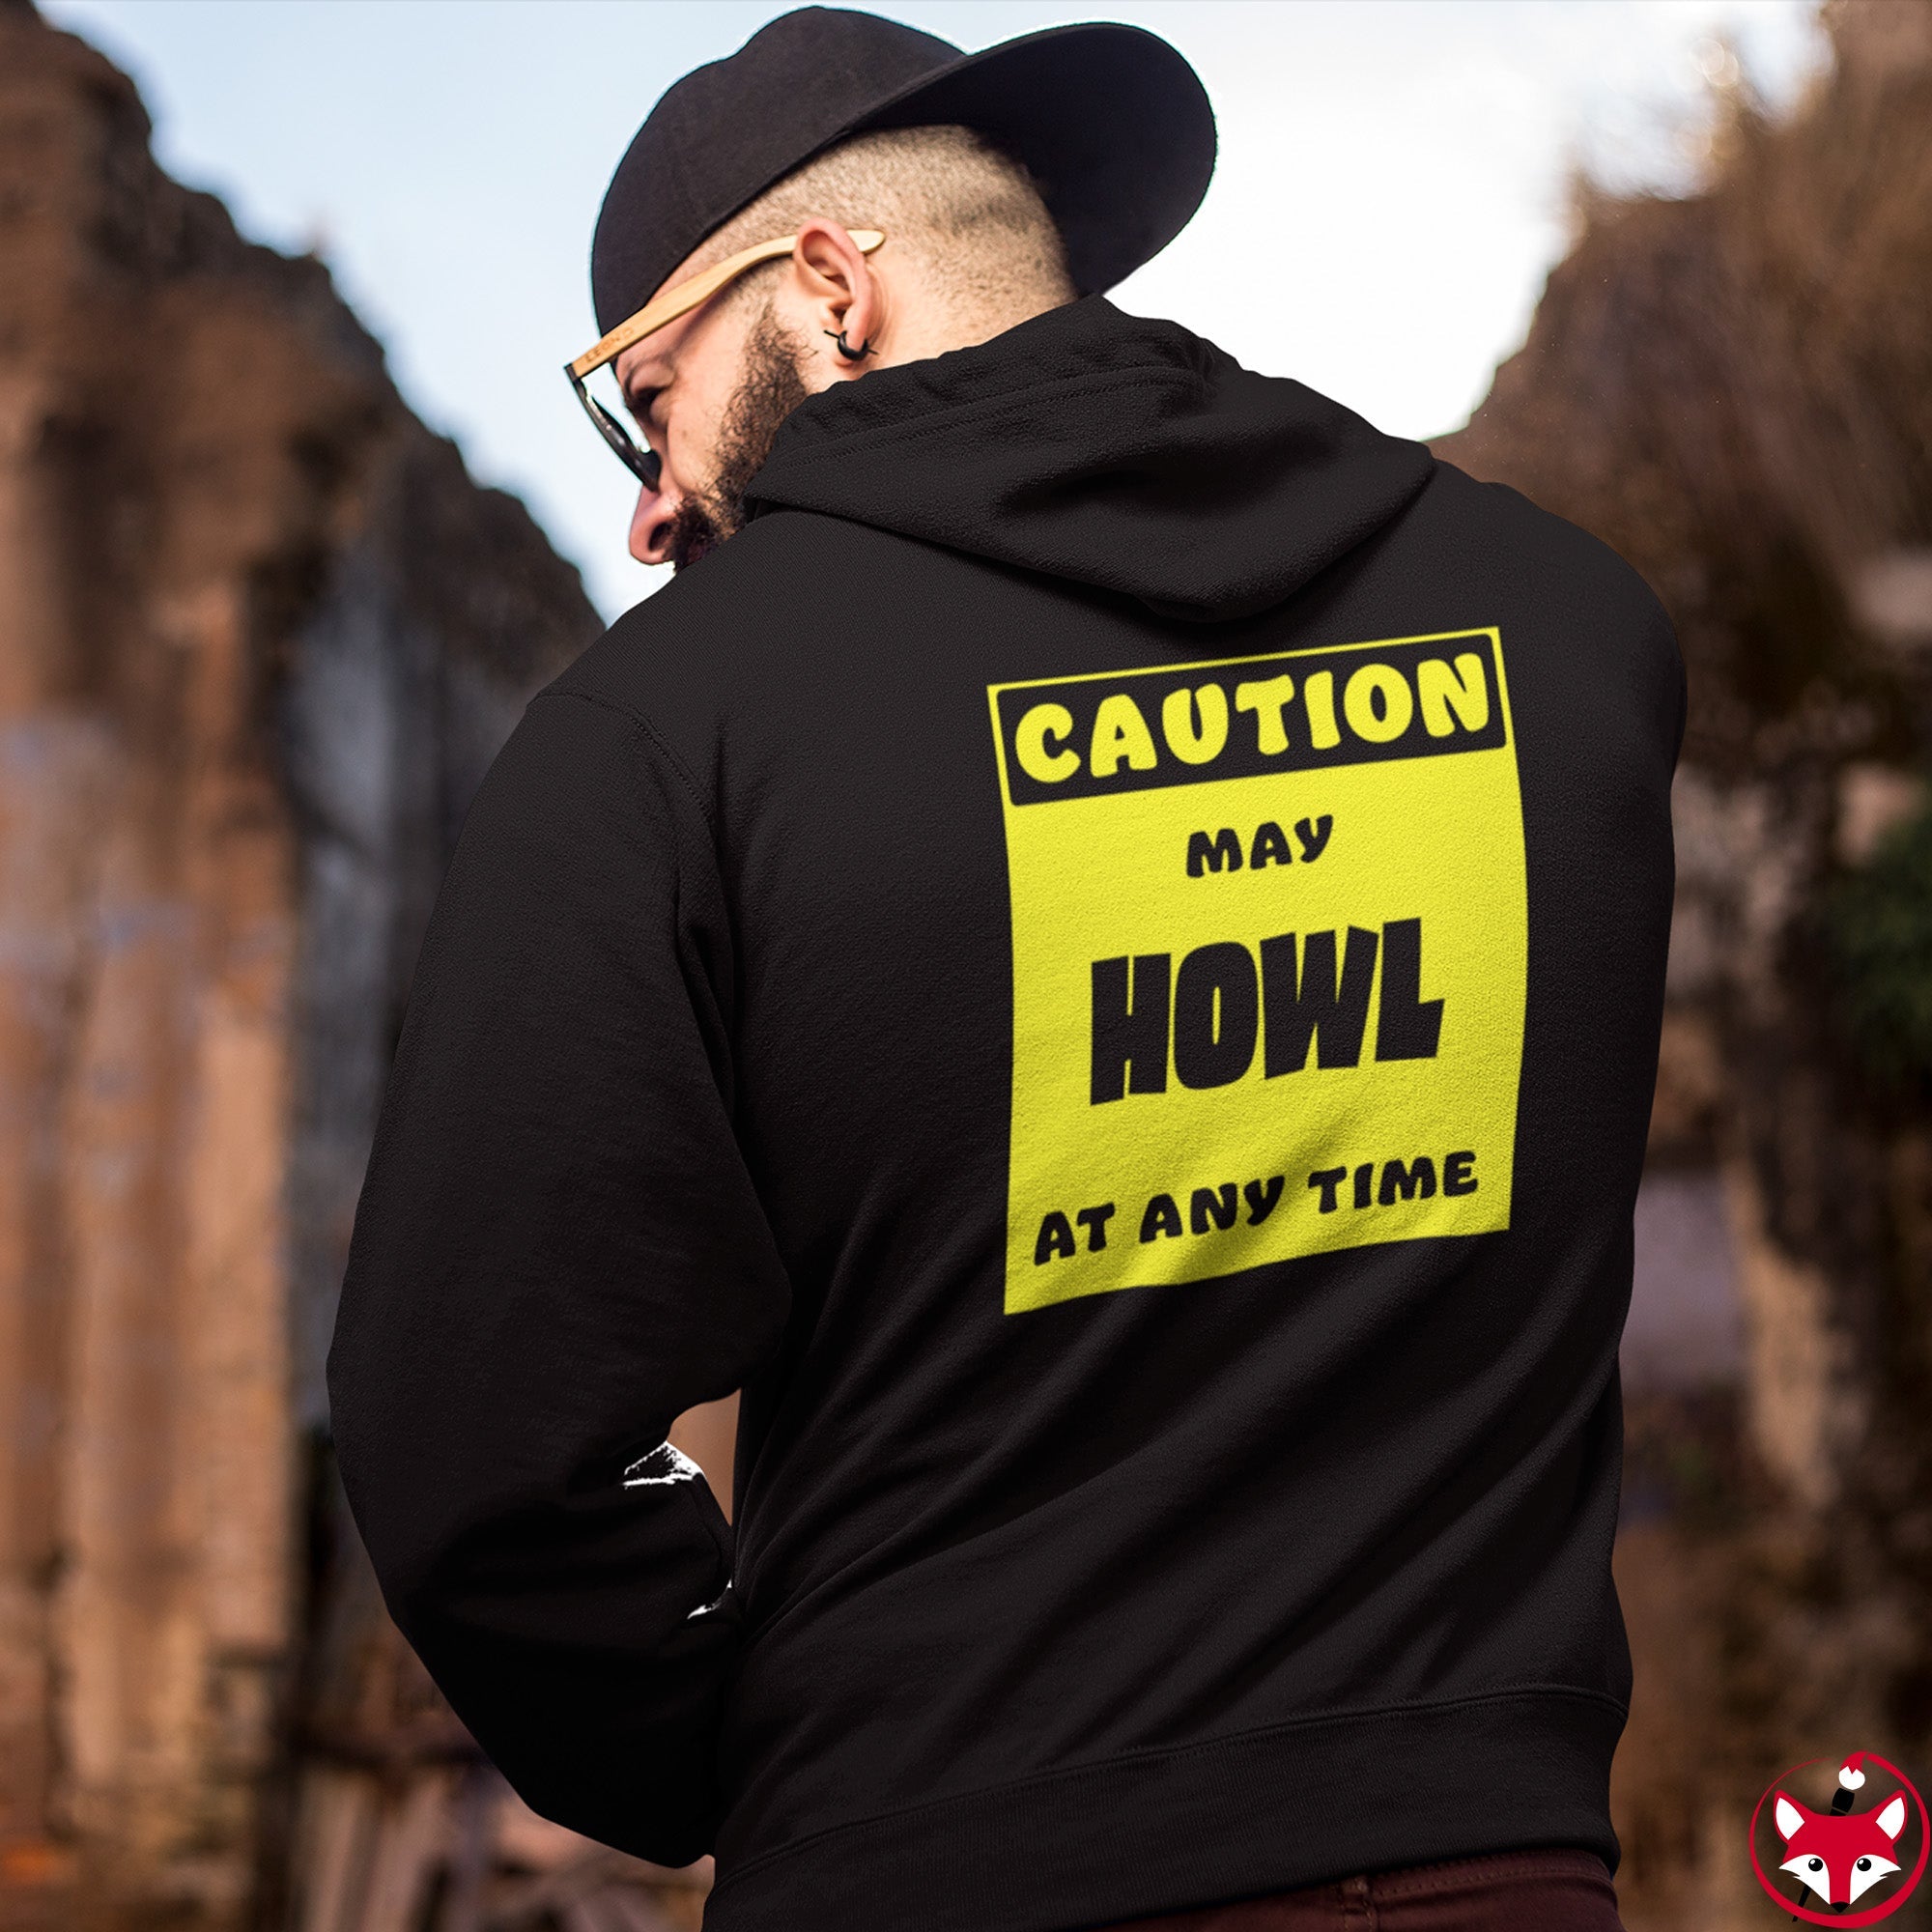 CAUTION! May HOWL at any time! - Hoodie Hoodie AFLT-Whootorca 